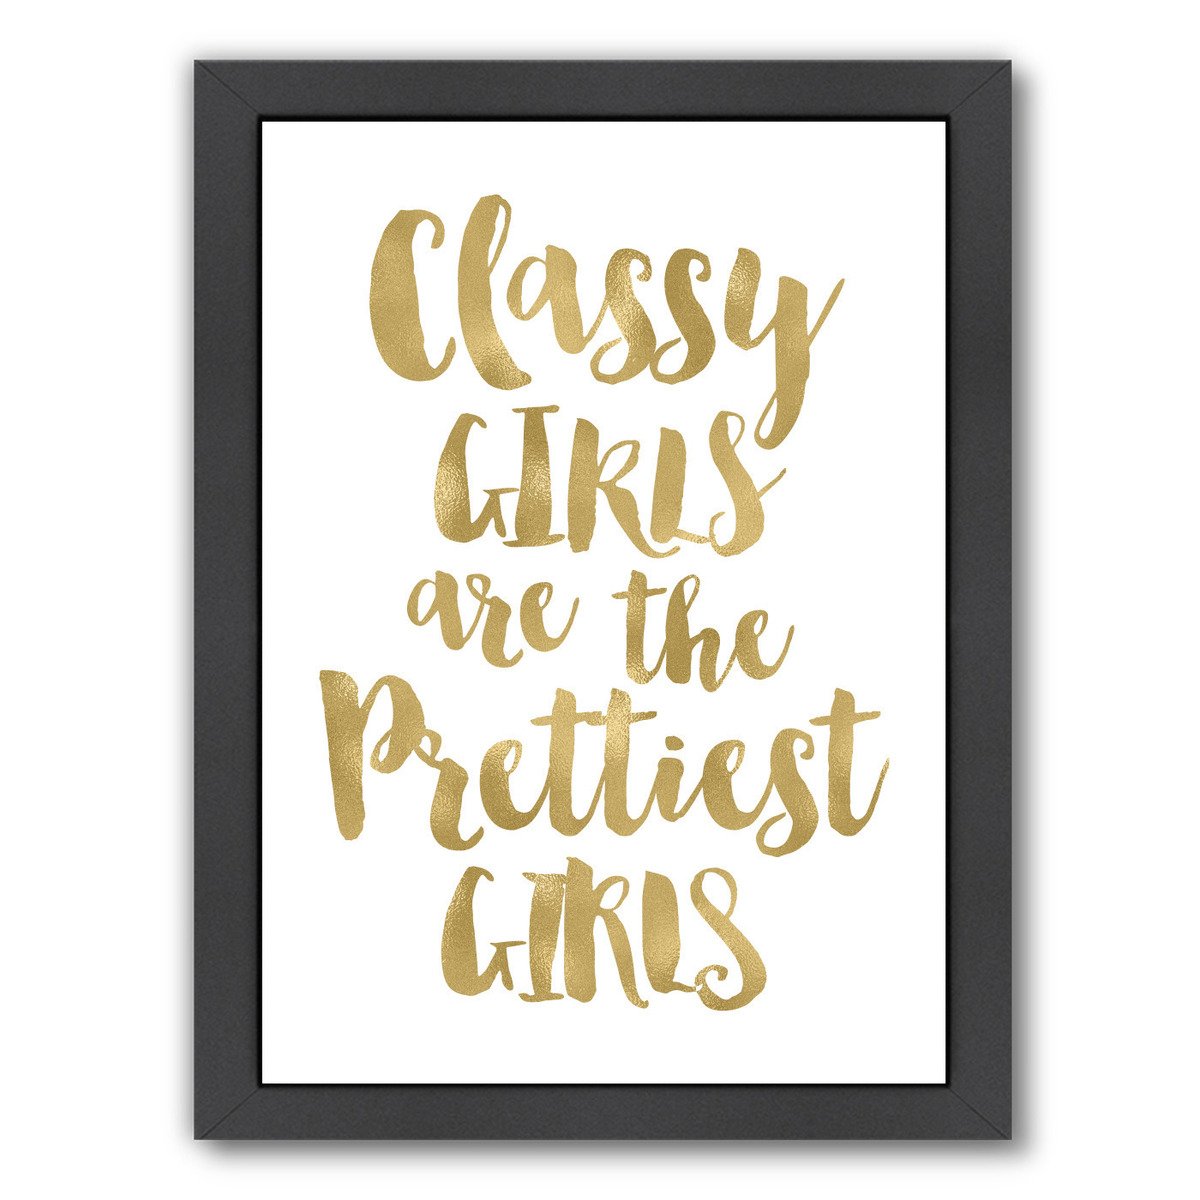 Classy Girls Gold White by Amy Brinkman Framed Print - Wall Art - Americanflat